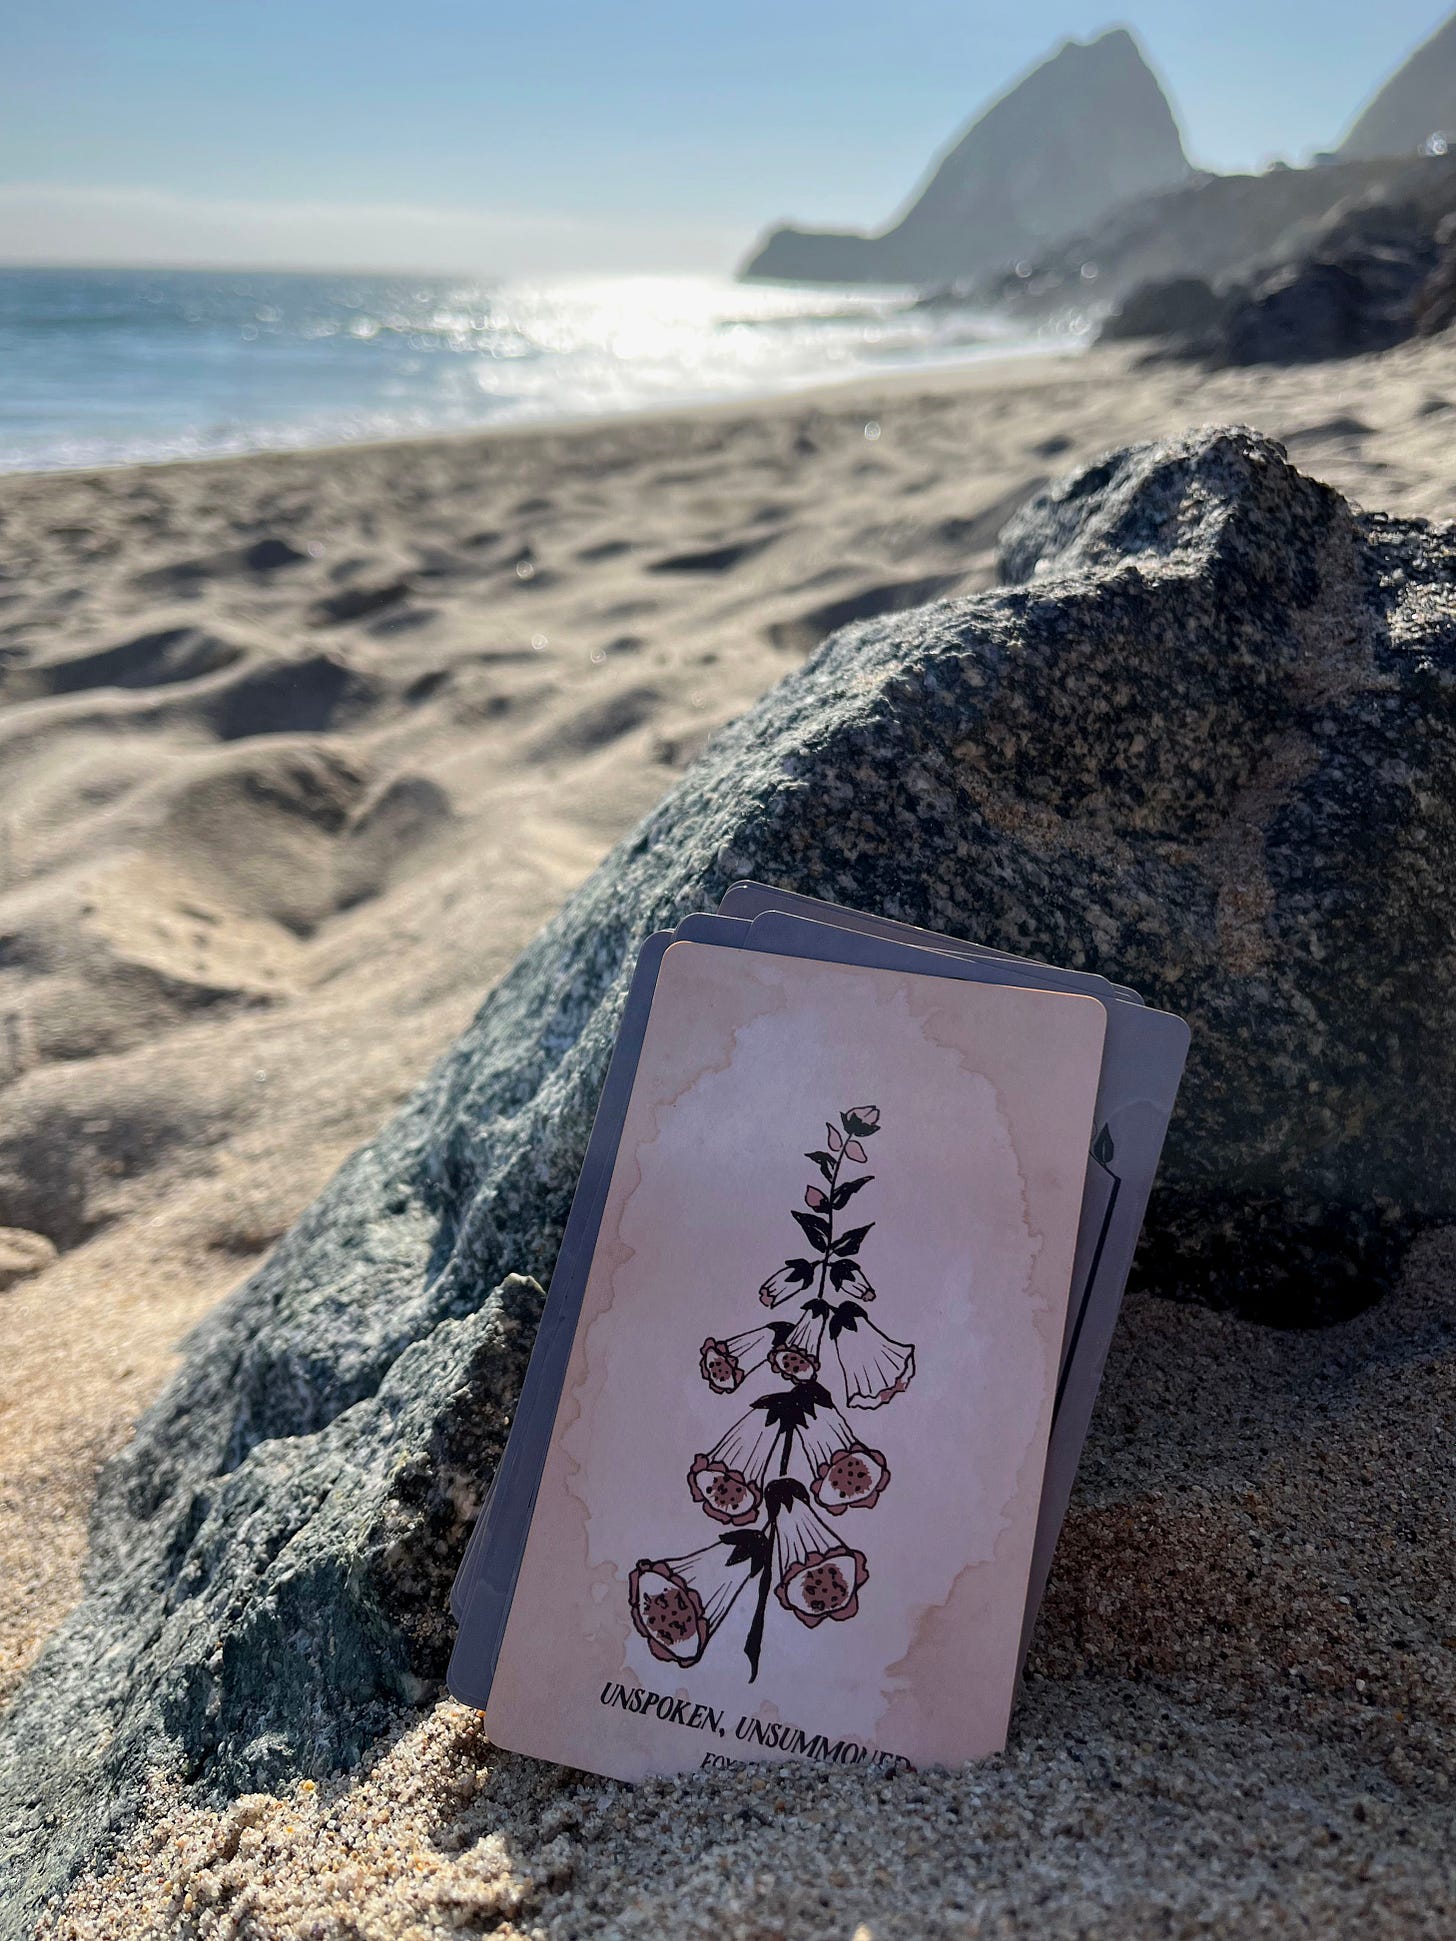 Picture of oracle card Unspoken, Unsummoned resting on a rock at the beach. Blue ocean is behind the rock and cards.